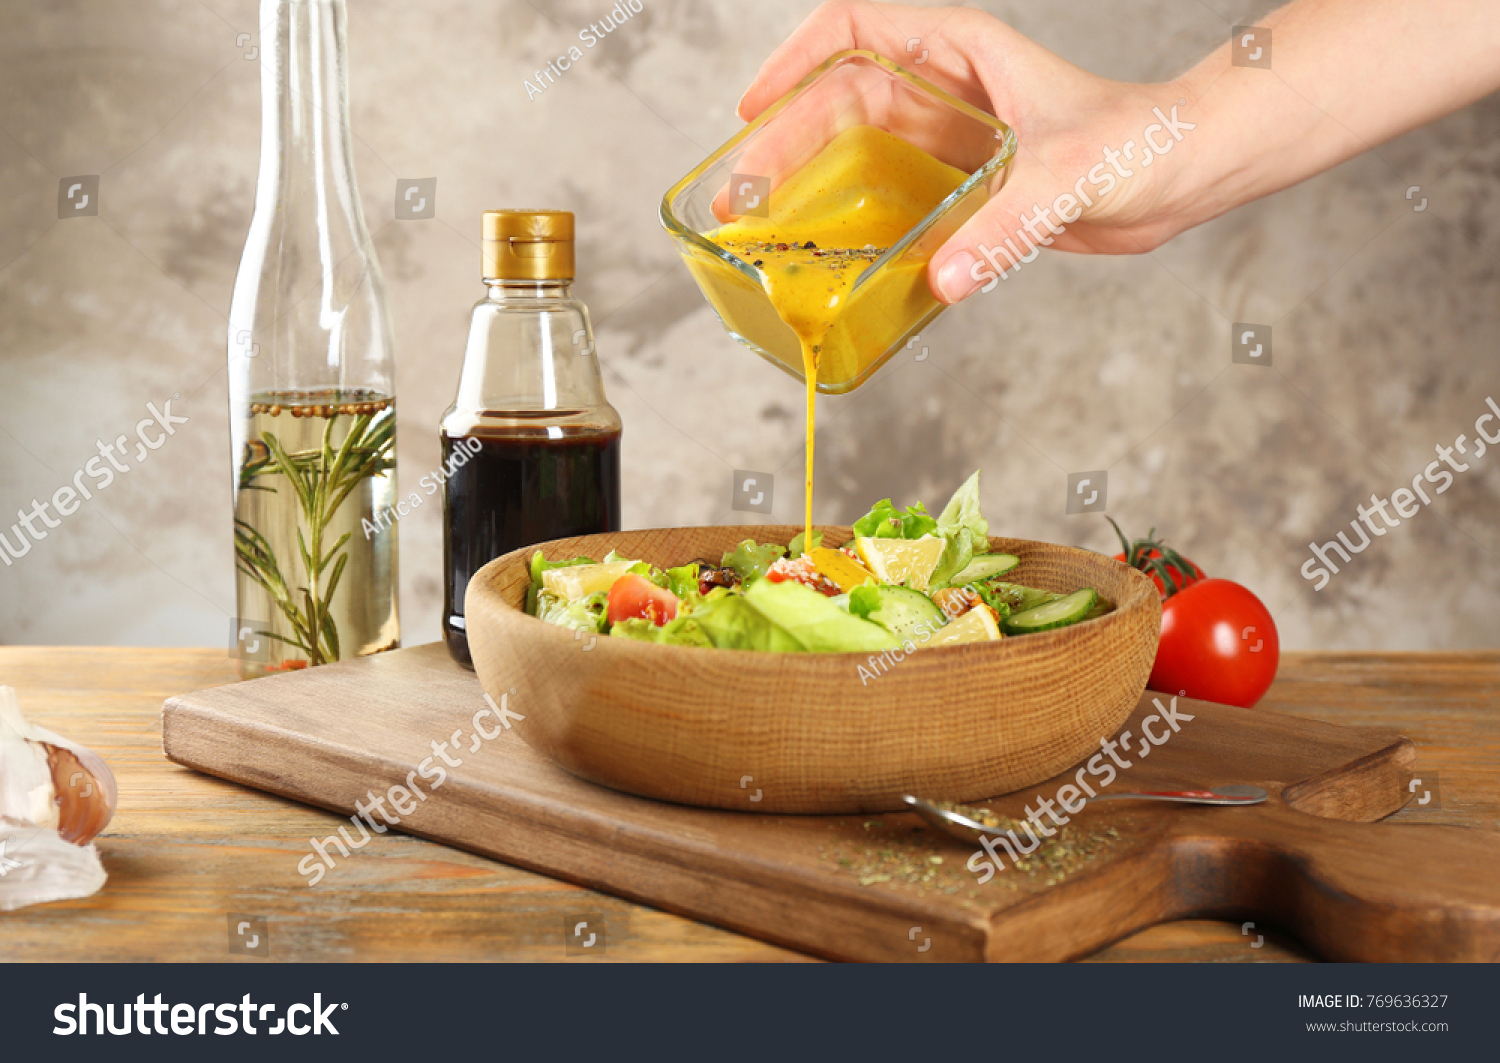 Woman pouring honey mustard dressing into bowl with fresh salad on table #769636327